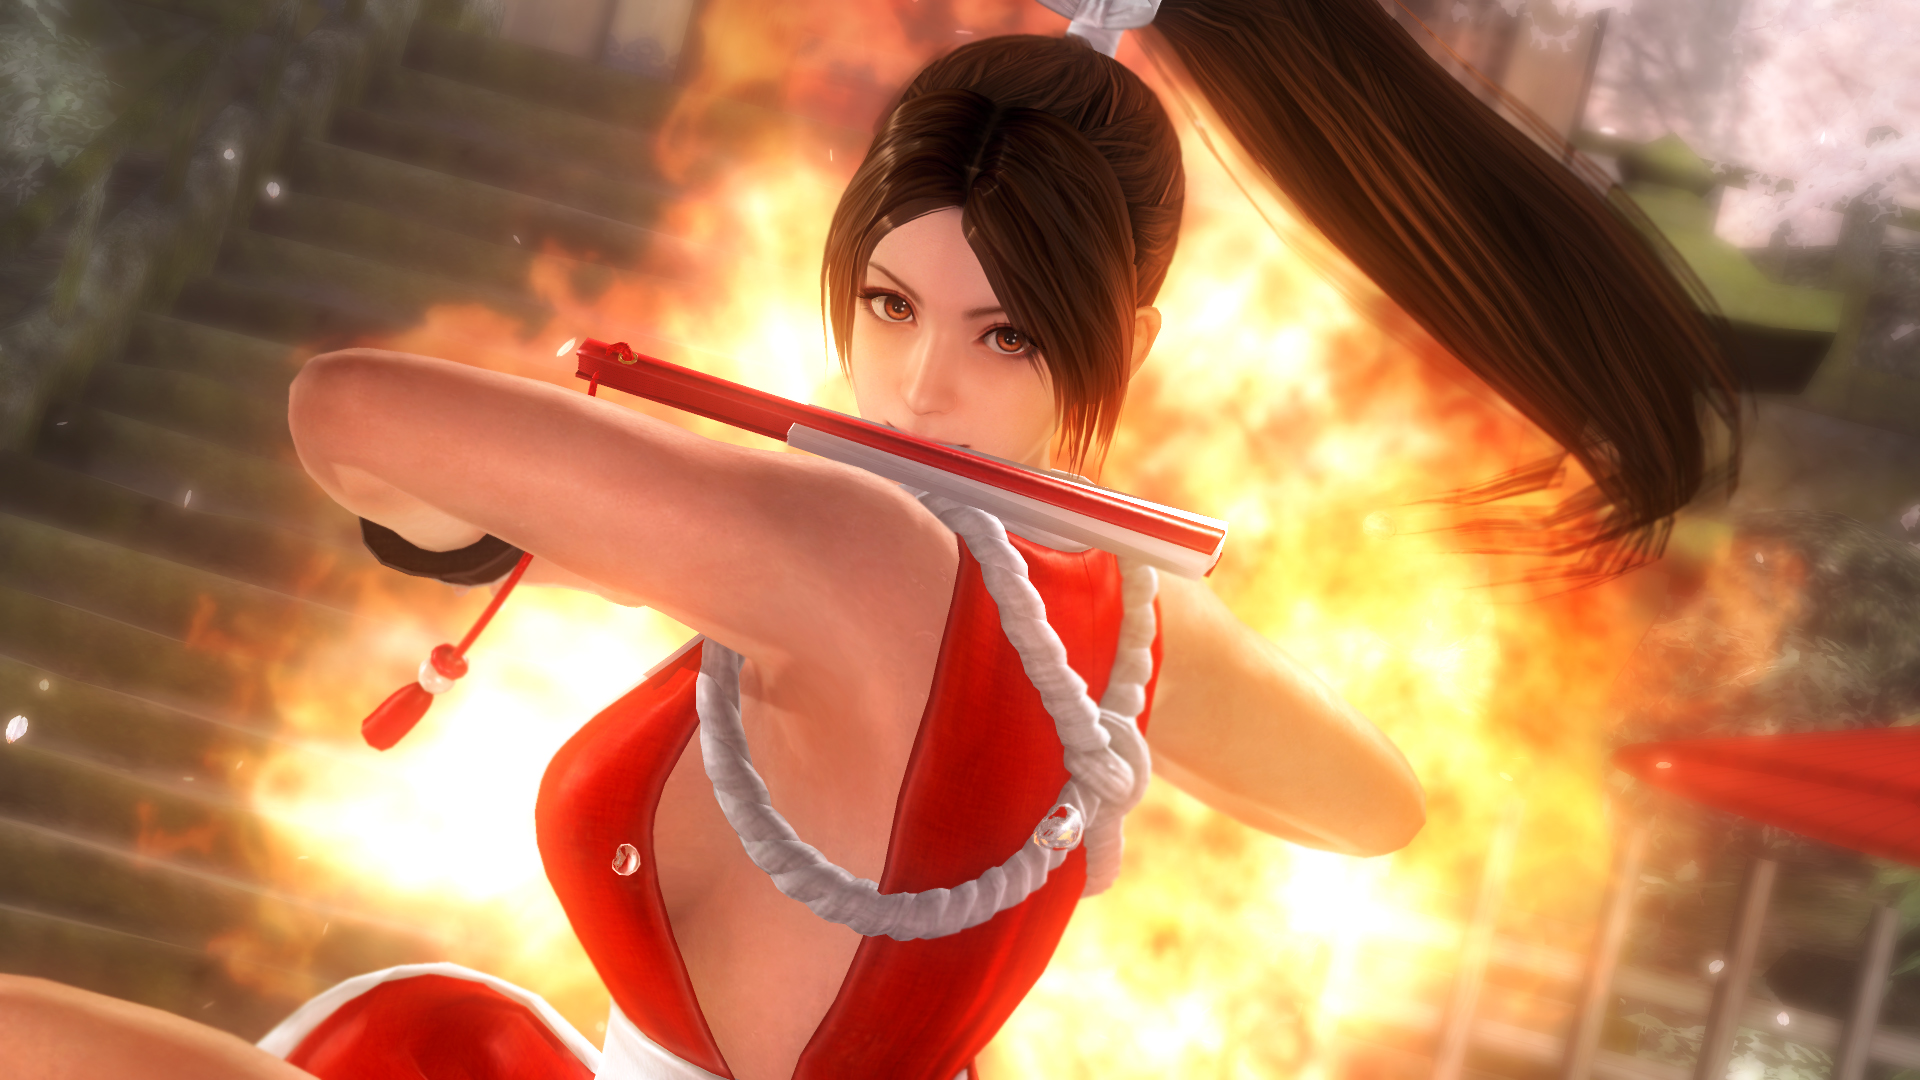 Mai Coming to “Dead or Alive 5” This September